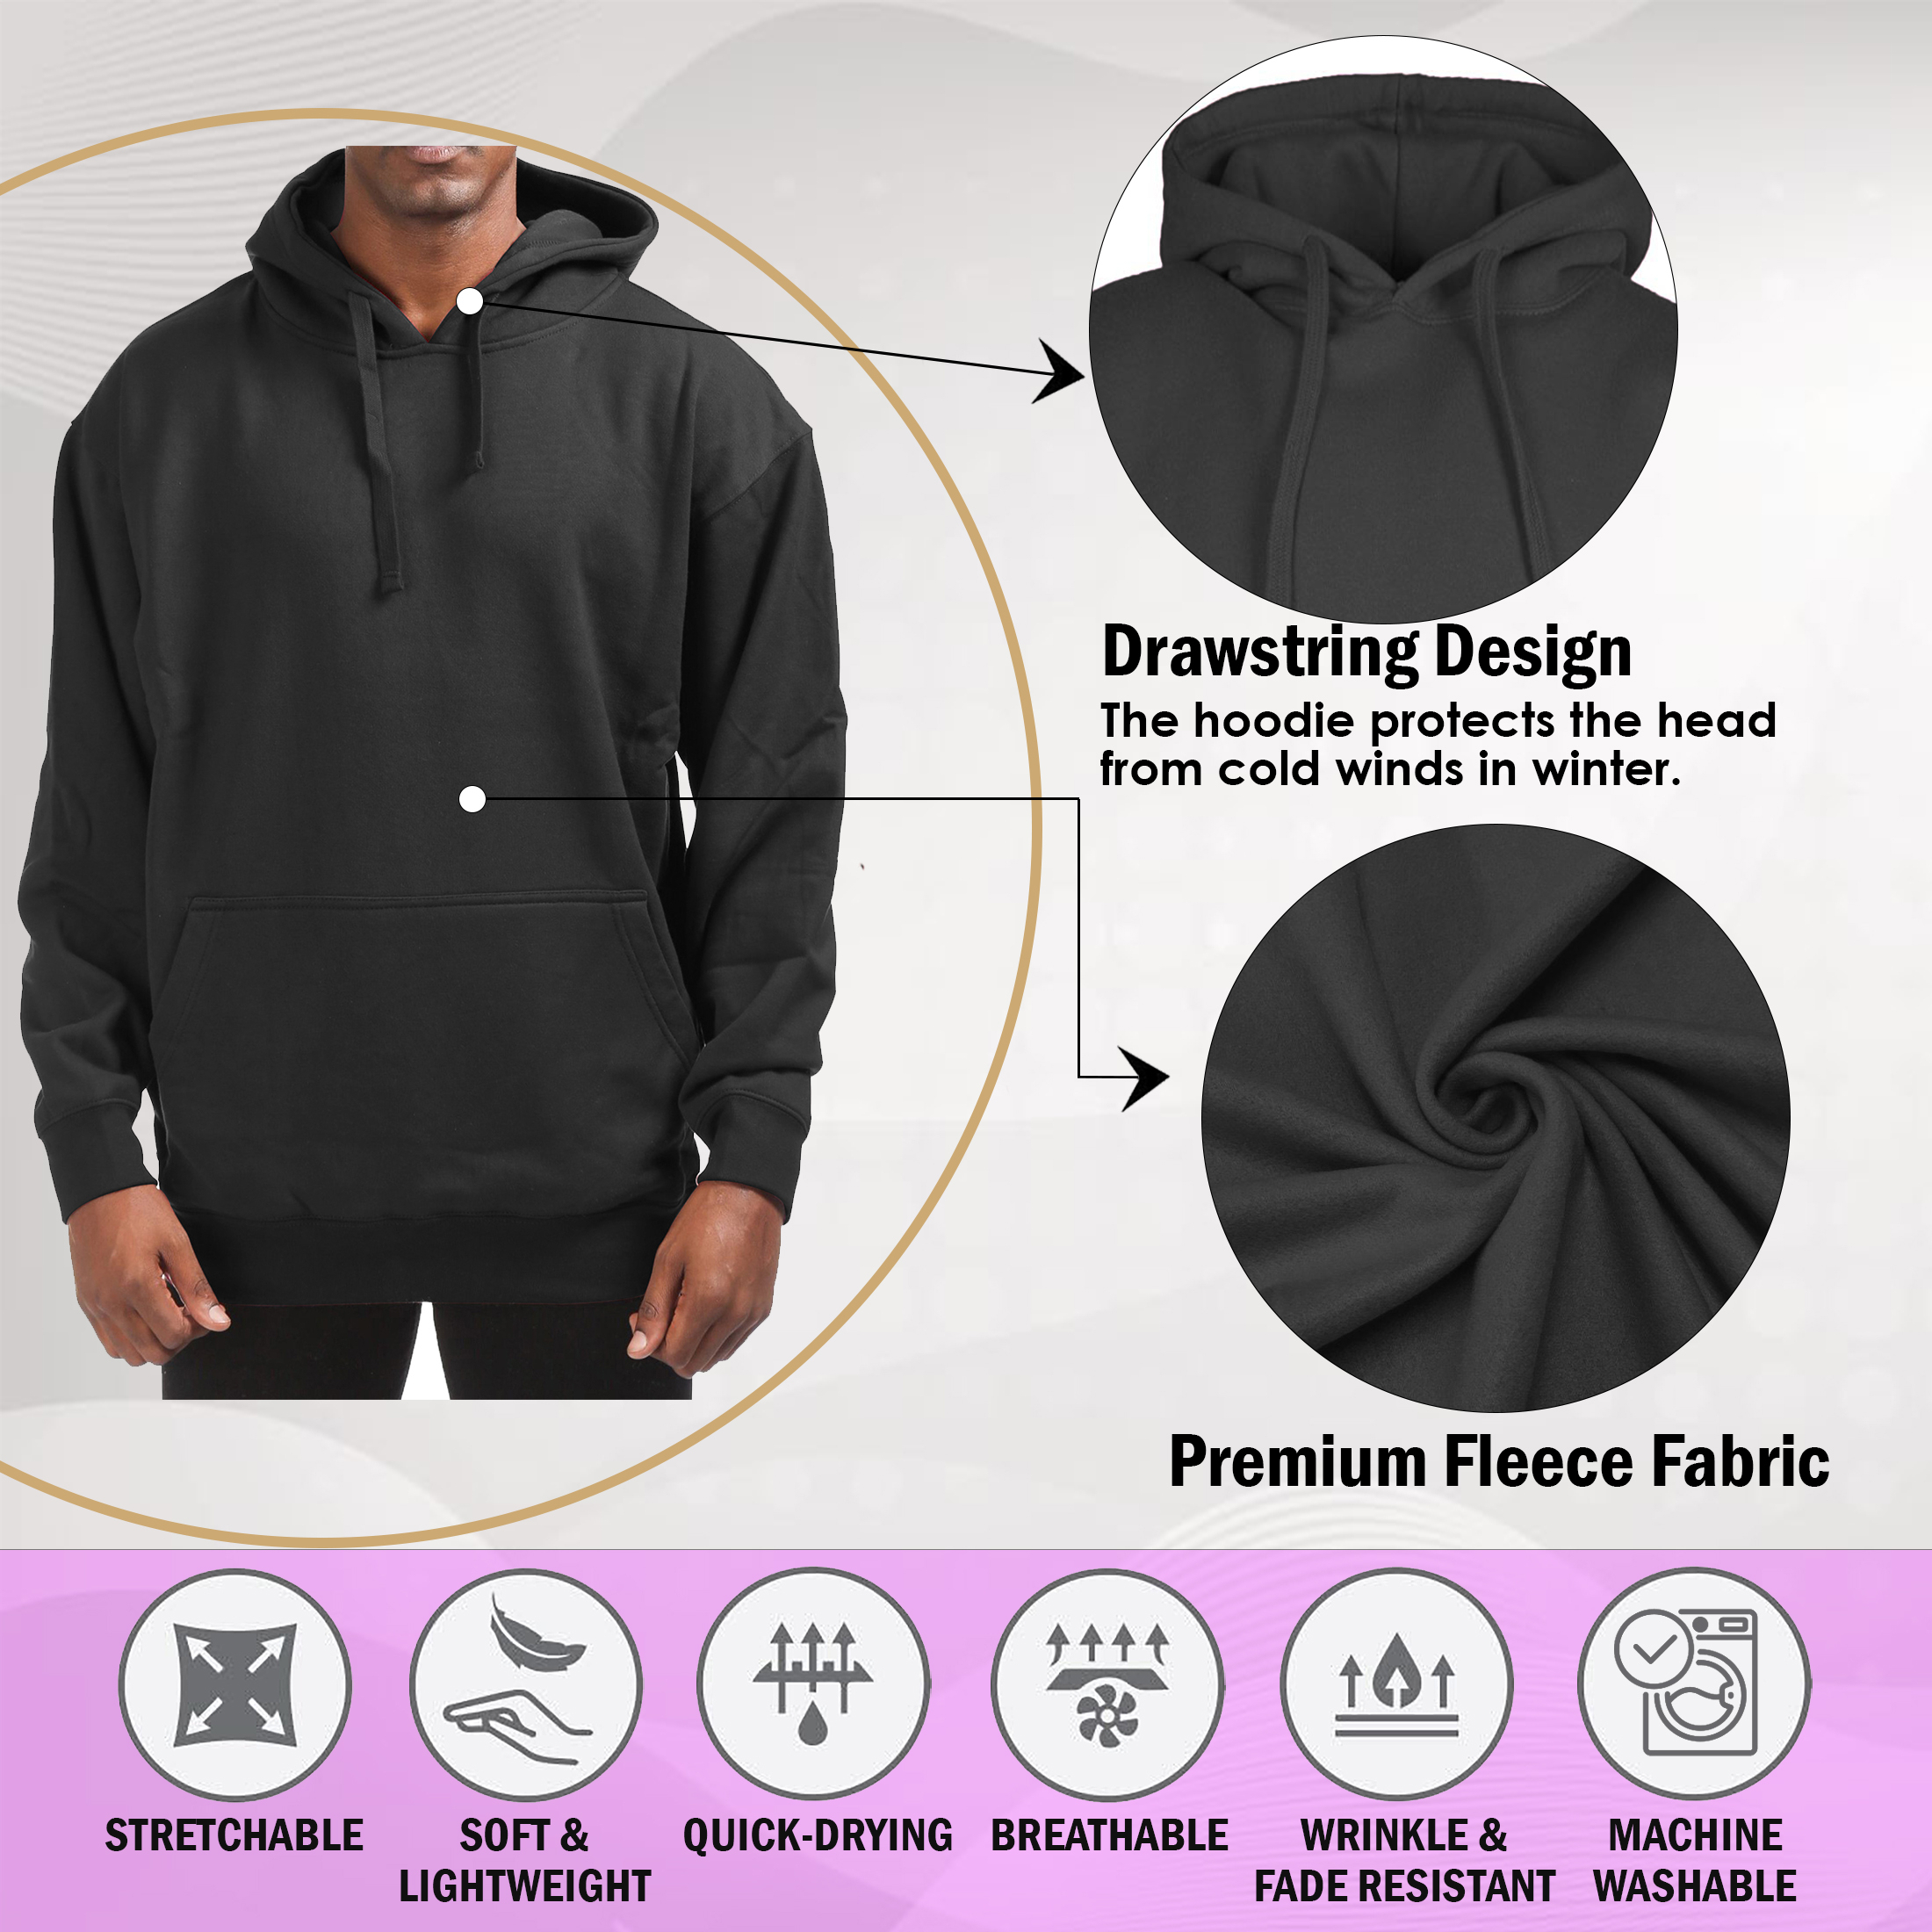 Men's Cotton-Blend Fleece Pullover Hoodie With Pocket (Big & Tall Sizes Available) - Black, Large